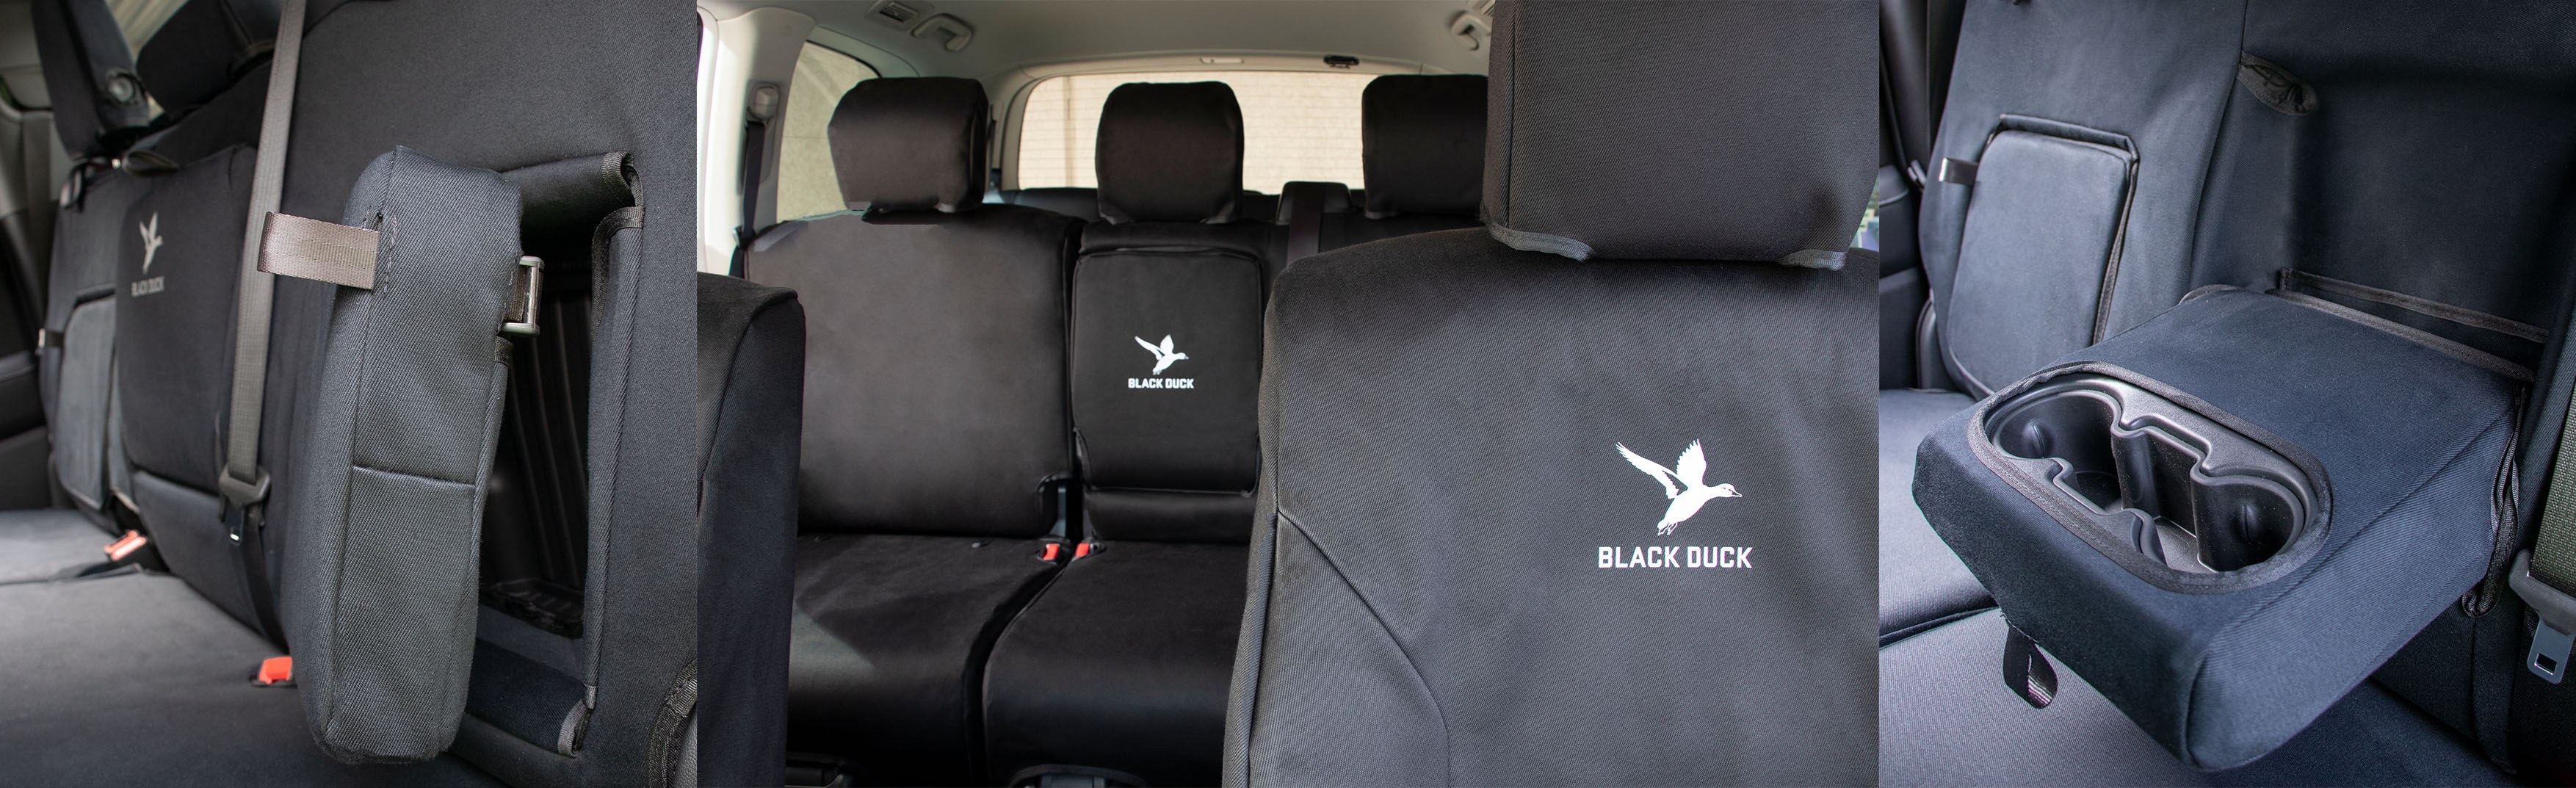 4Elements seat covers by Black Duck